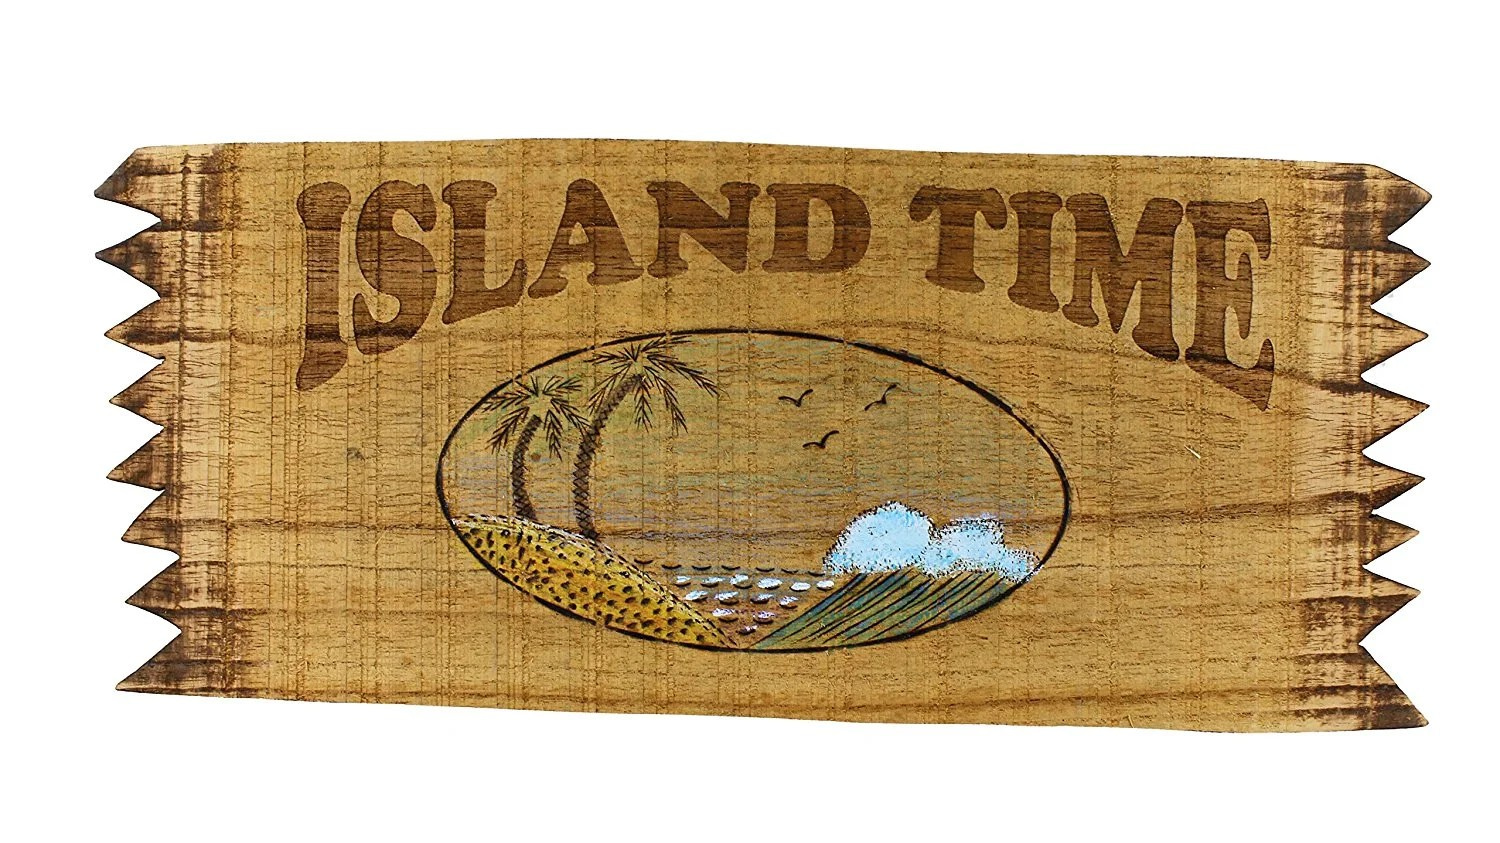 15.25"L Wooden Island Time Wall Sign